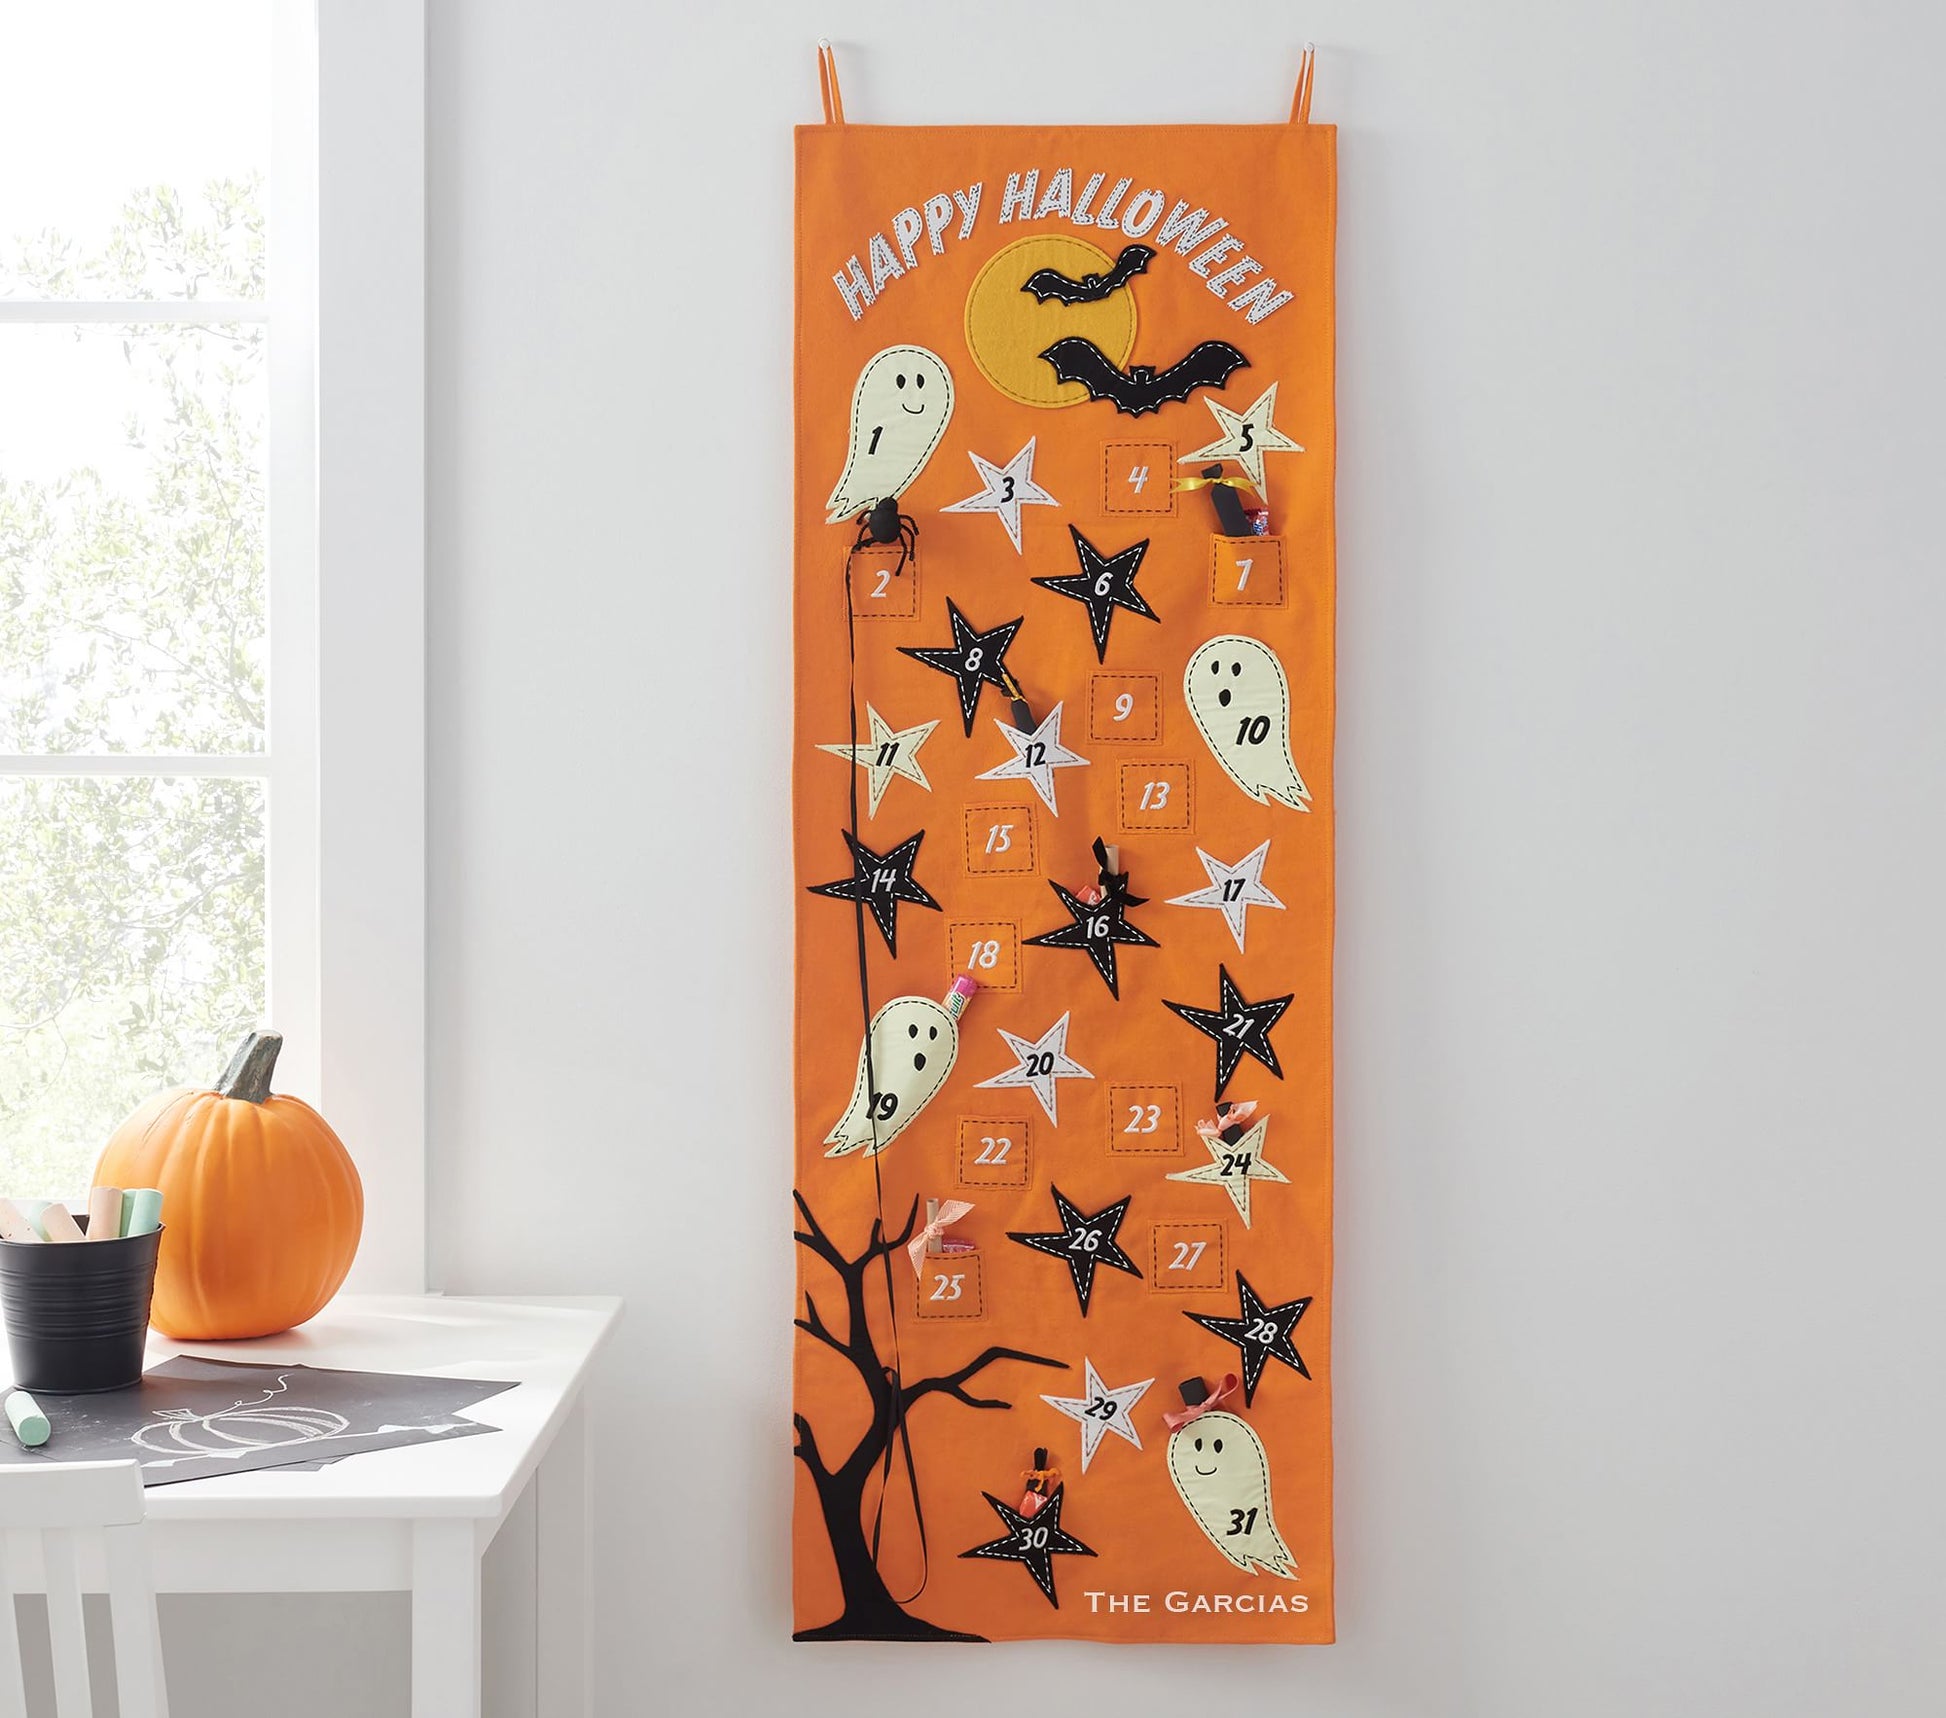 Happy Halloween Ghostly Countdown Calendar in orange with white ghost figures and black & white stars